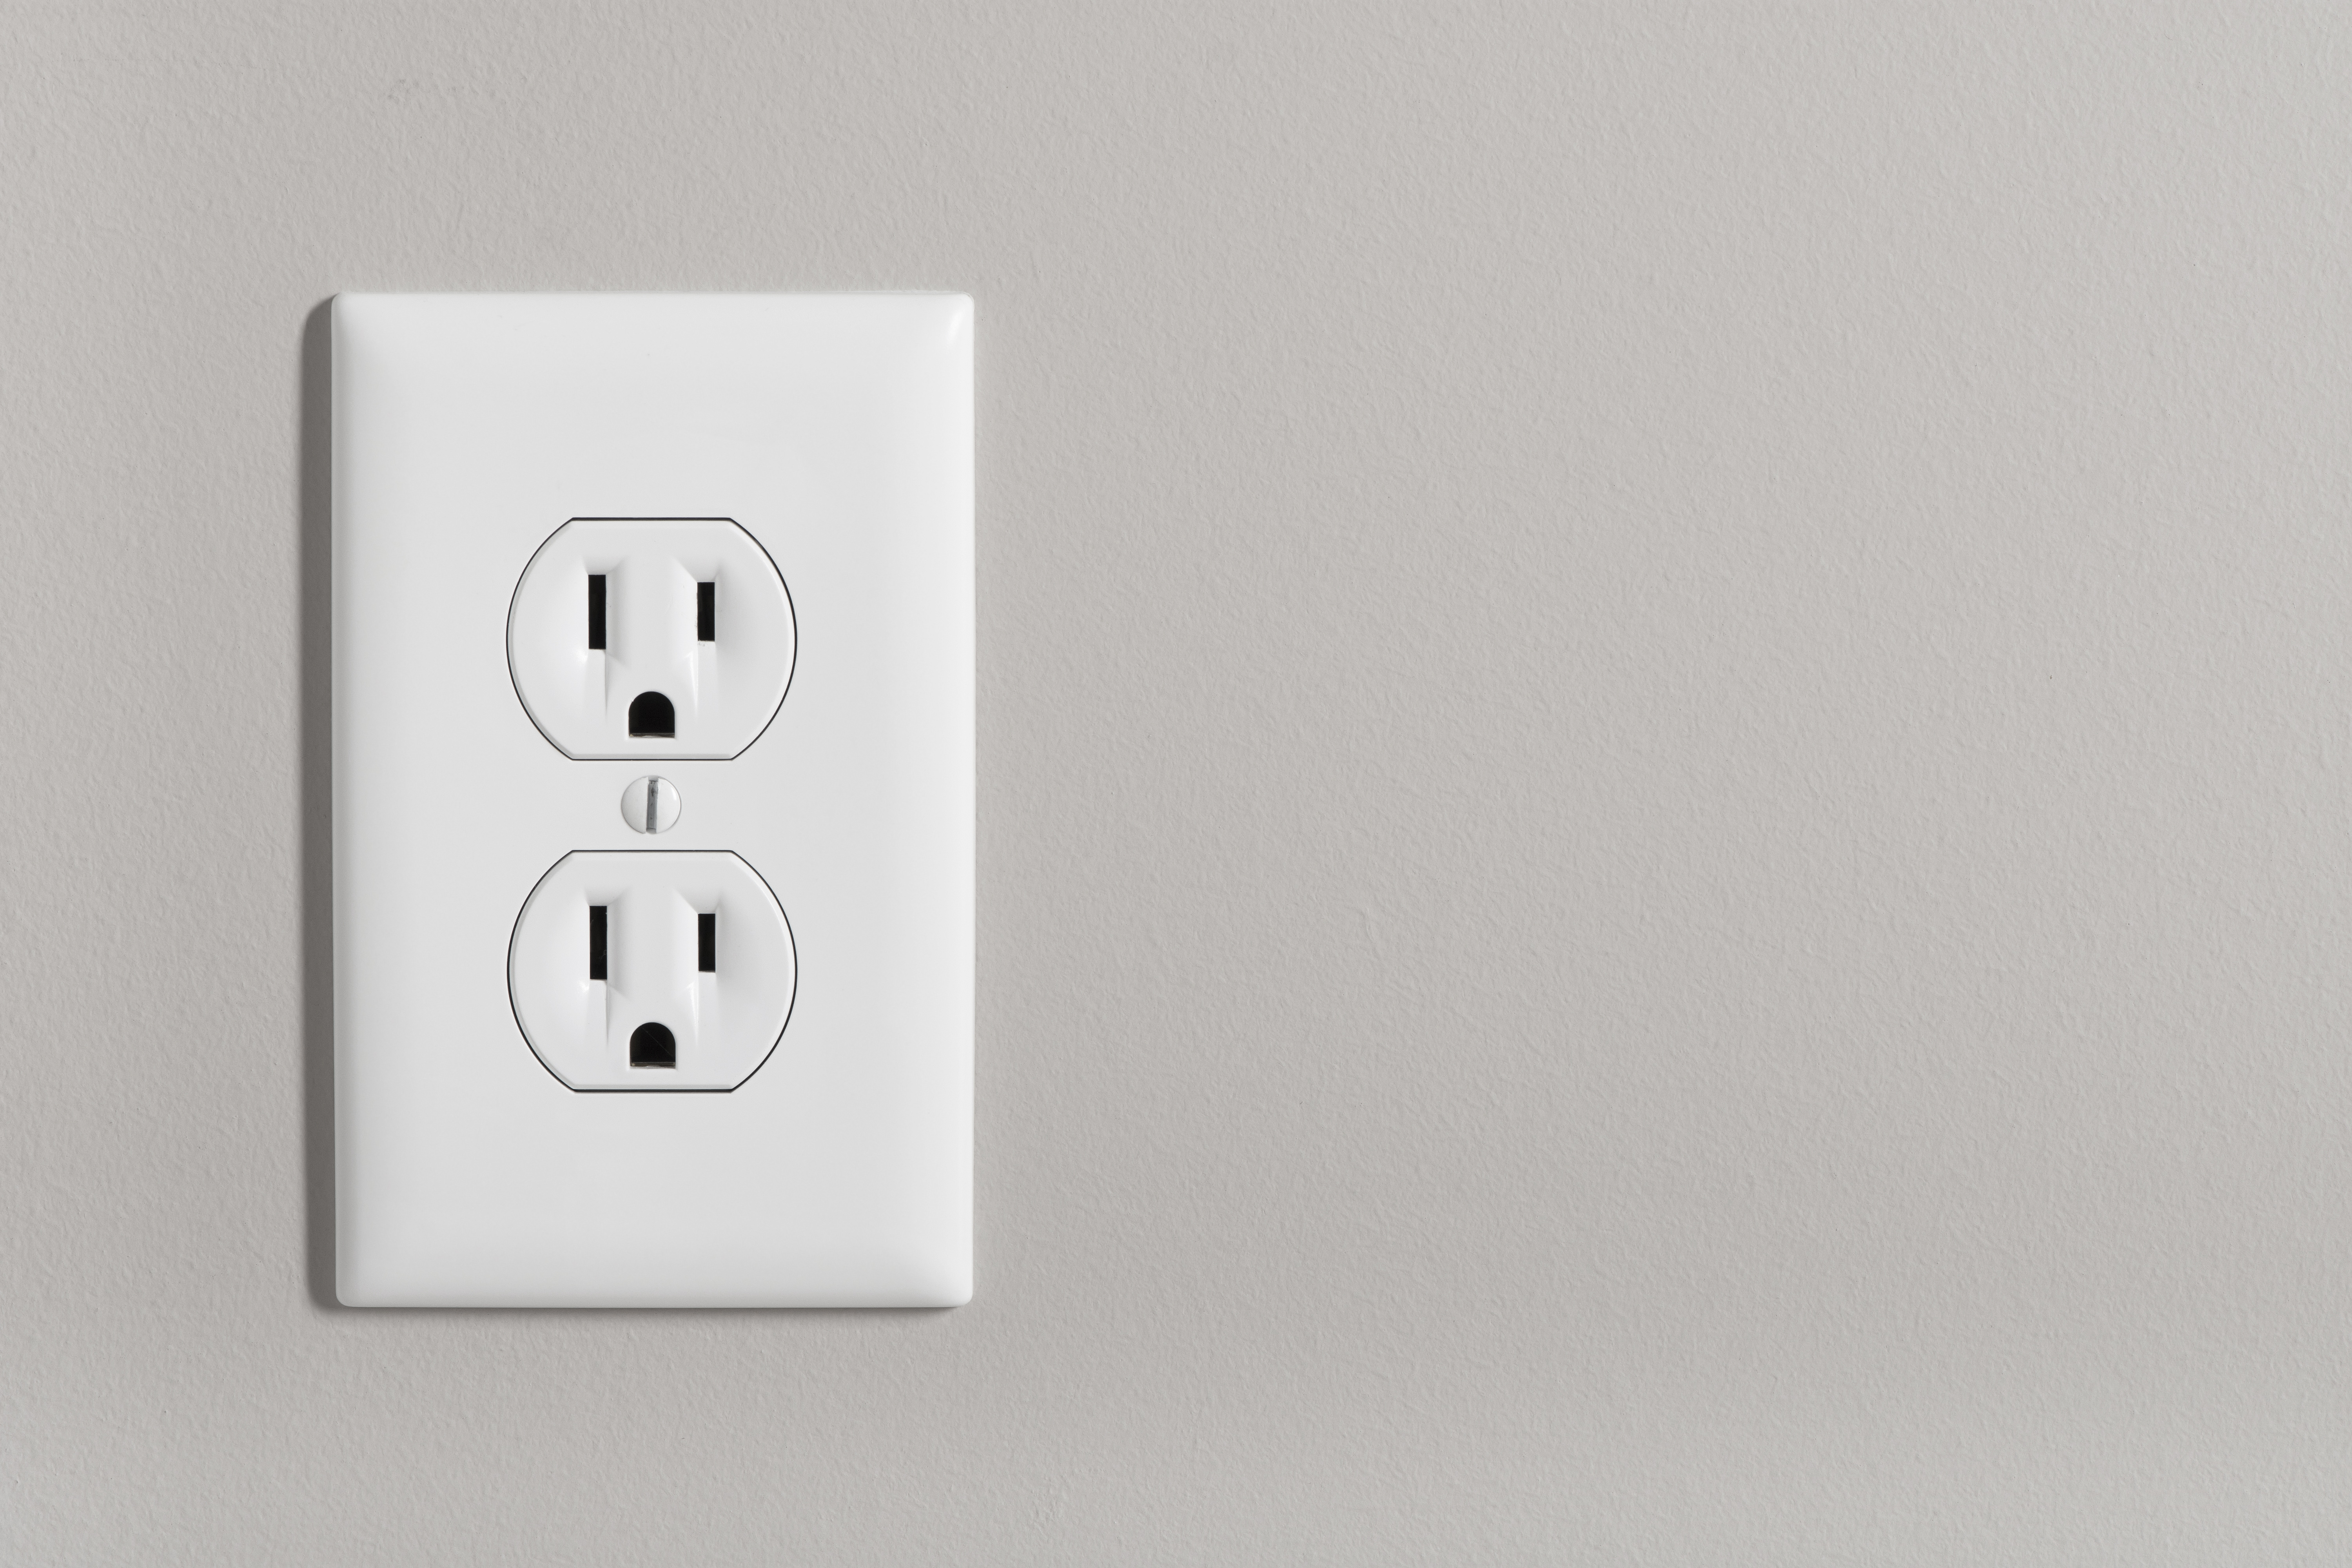 A white home electrical outlet on a light grey wall